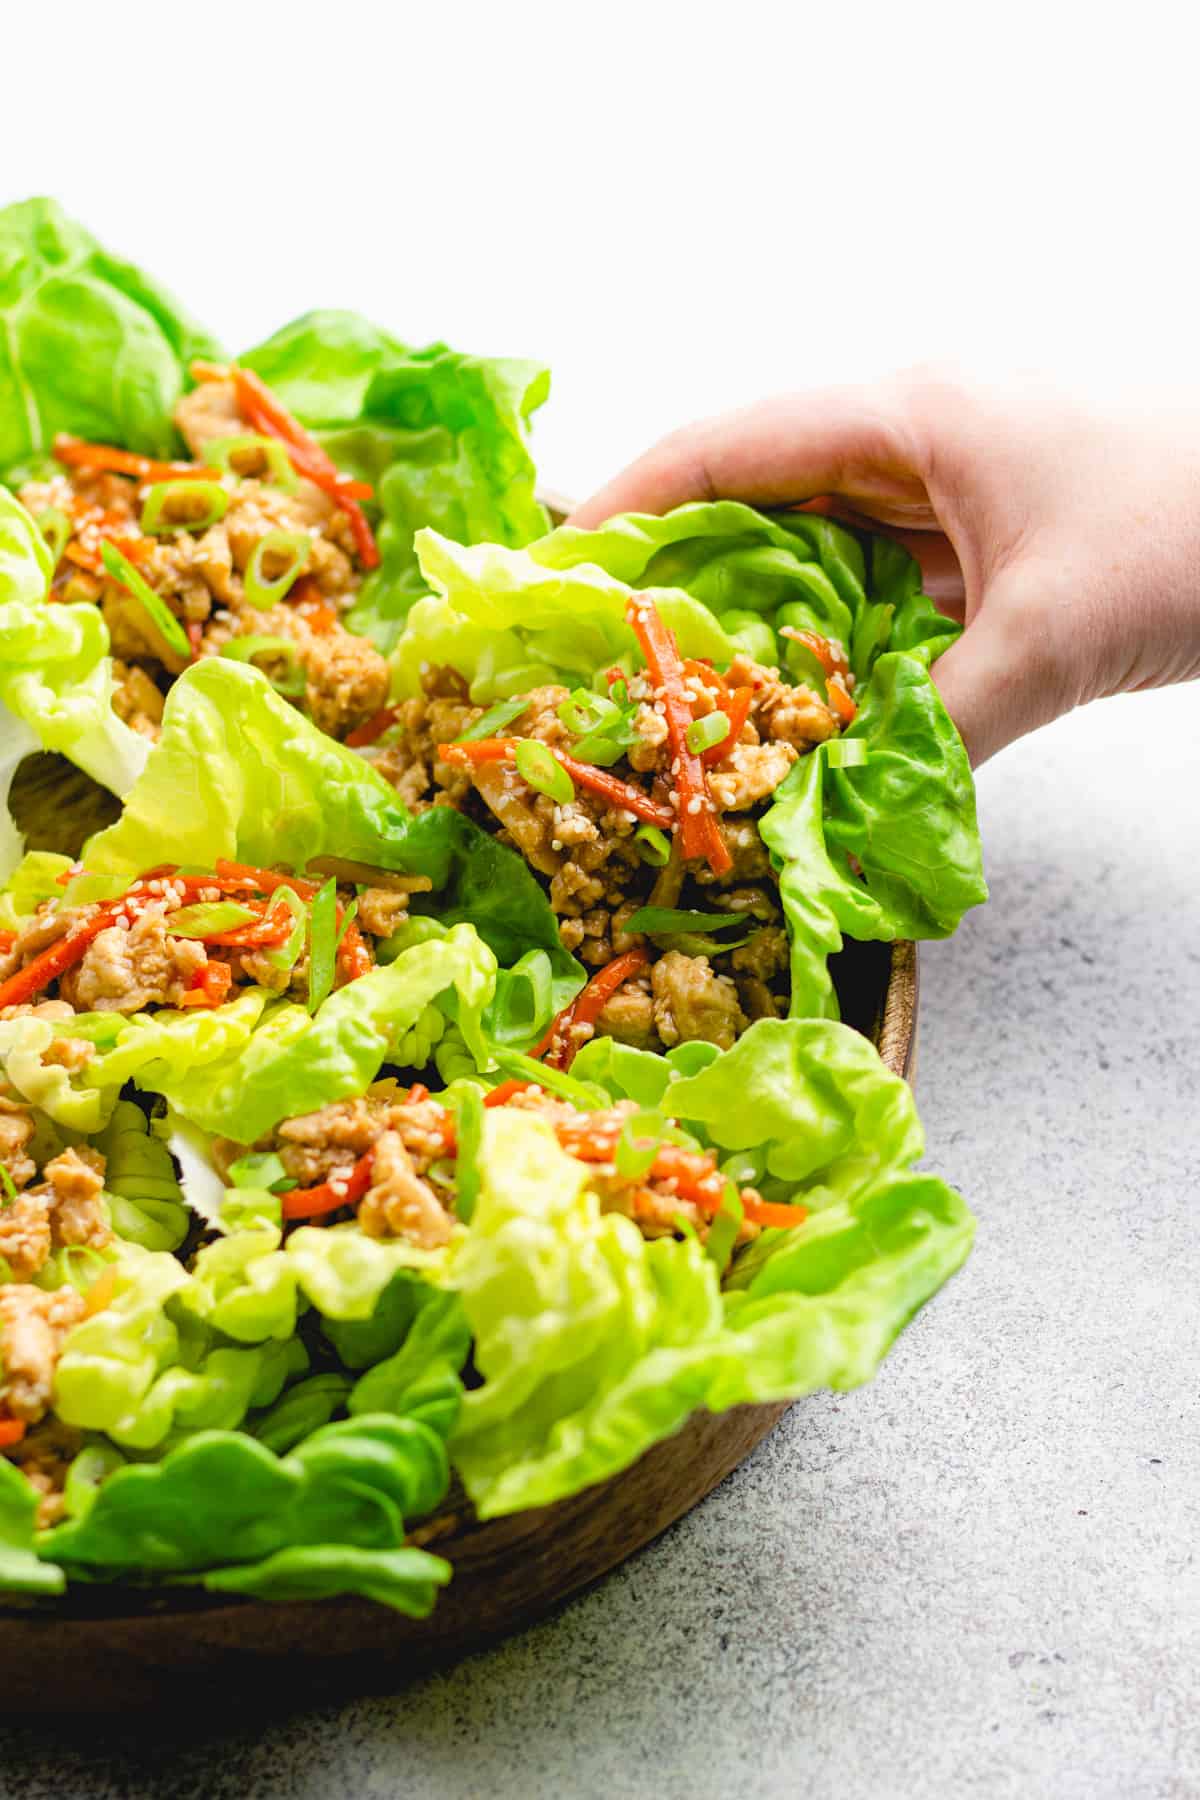 a hand is grabbing a lettuce wrap from a wooden plate.